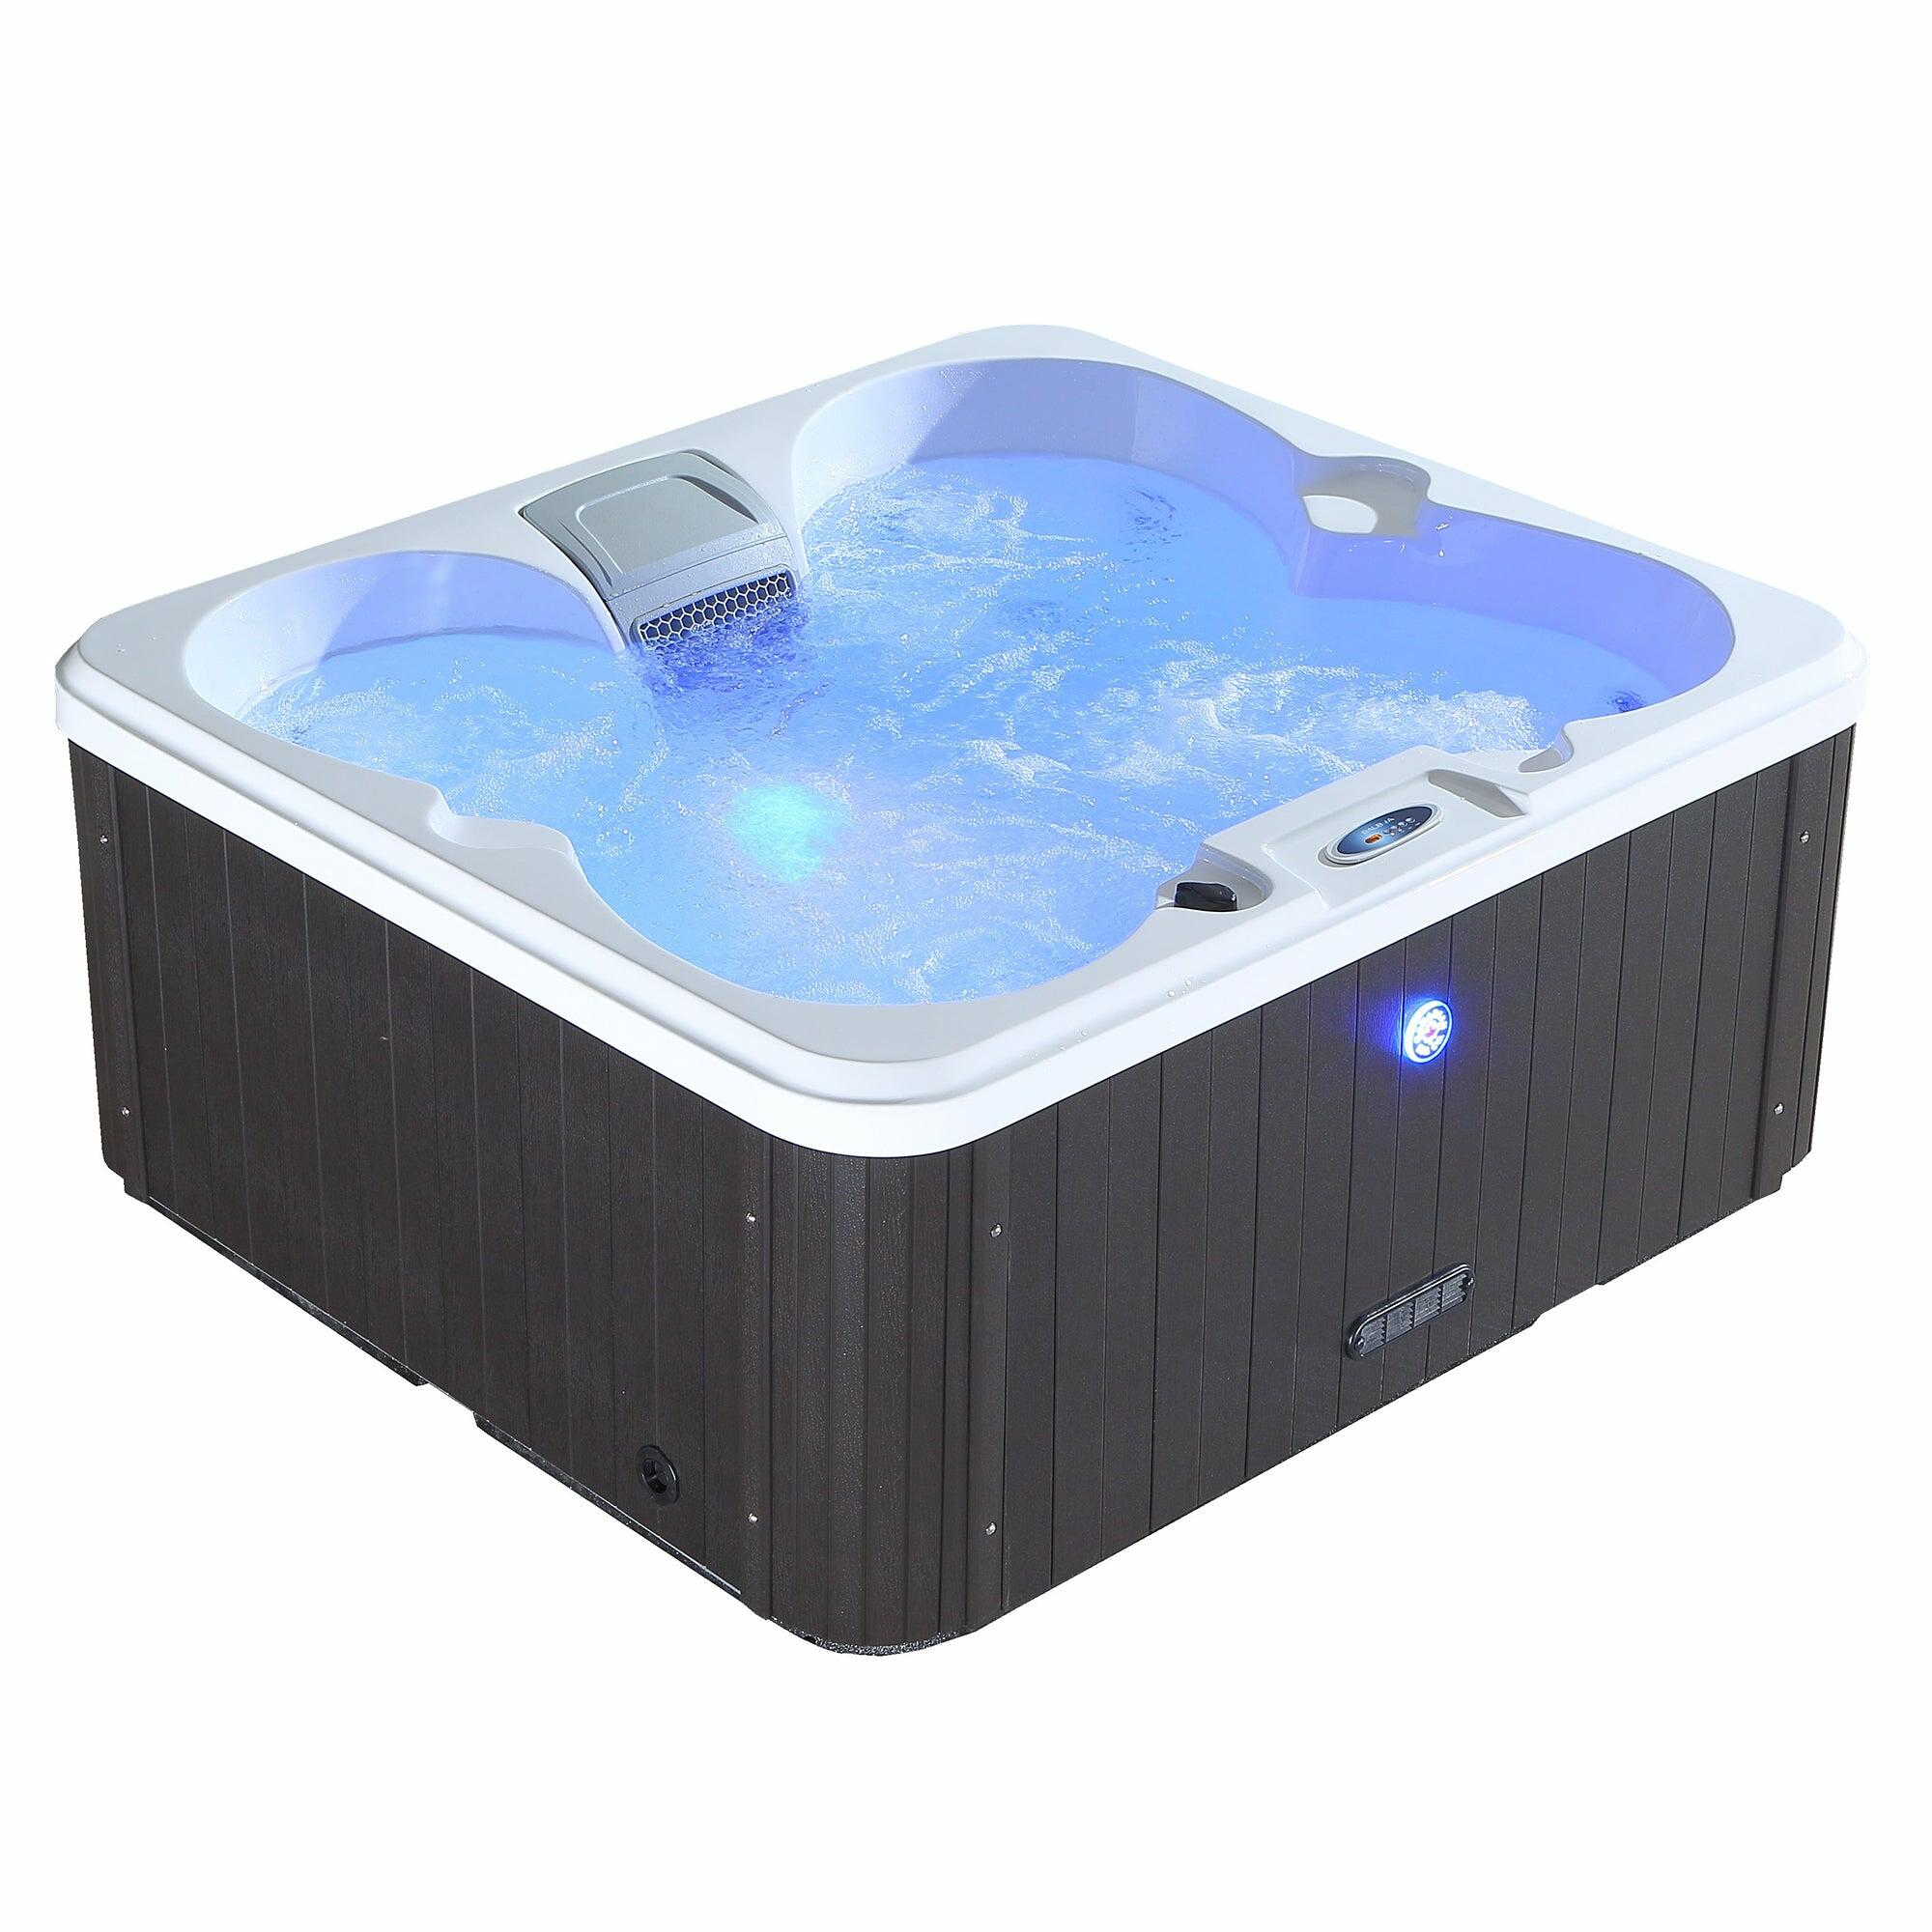 An image of Canadian Spa Gander 14 Jet 4 Person Hot Tub